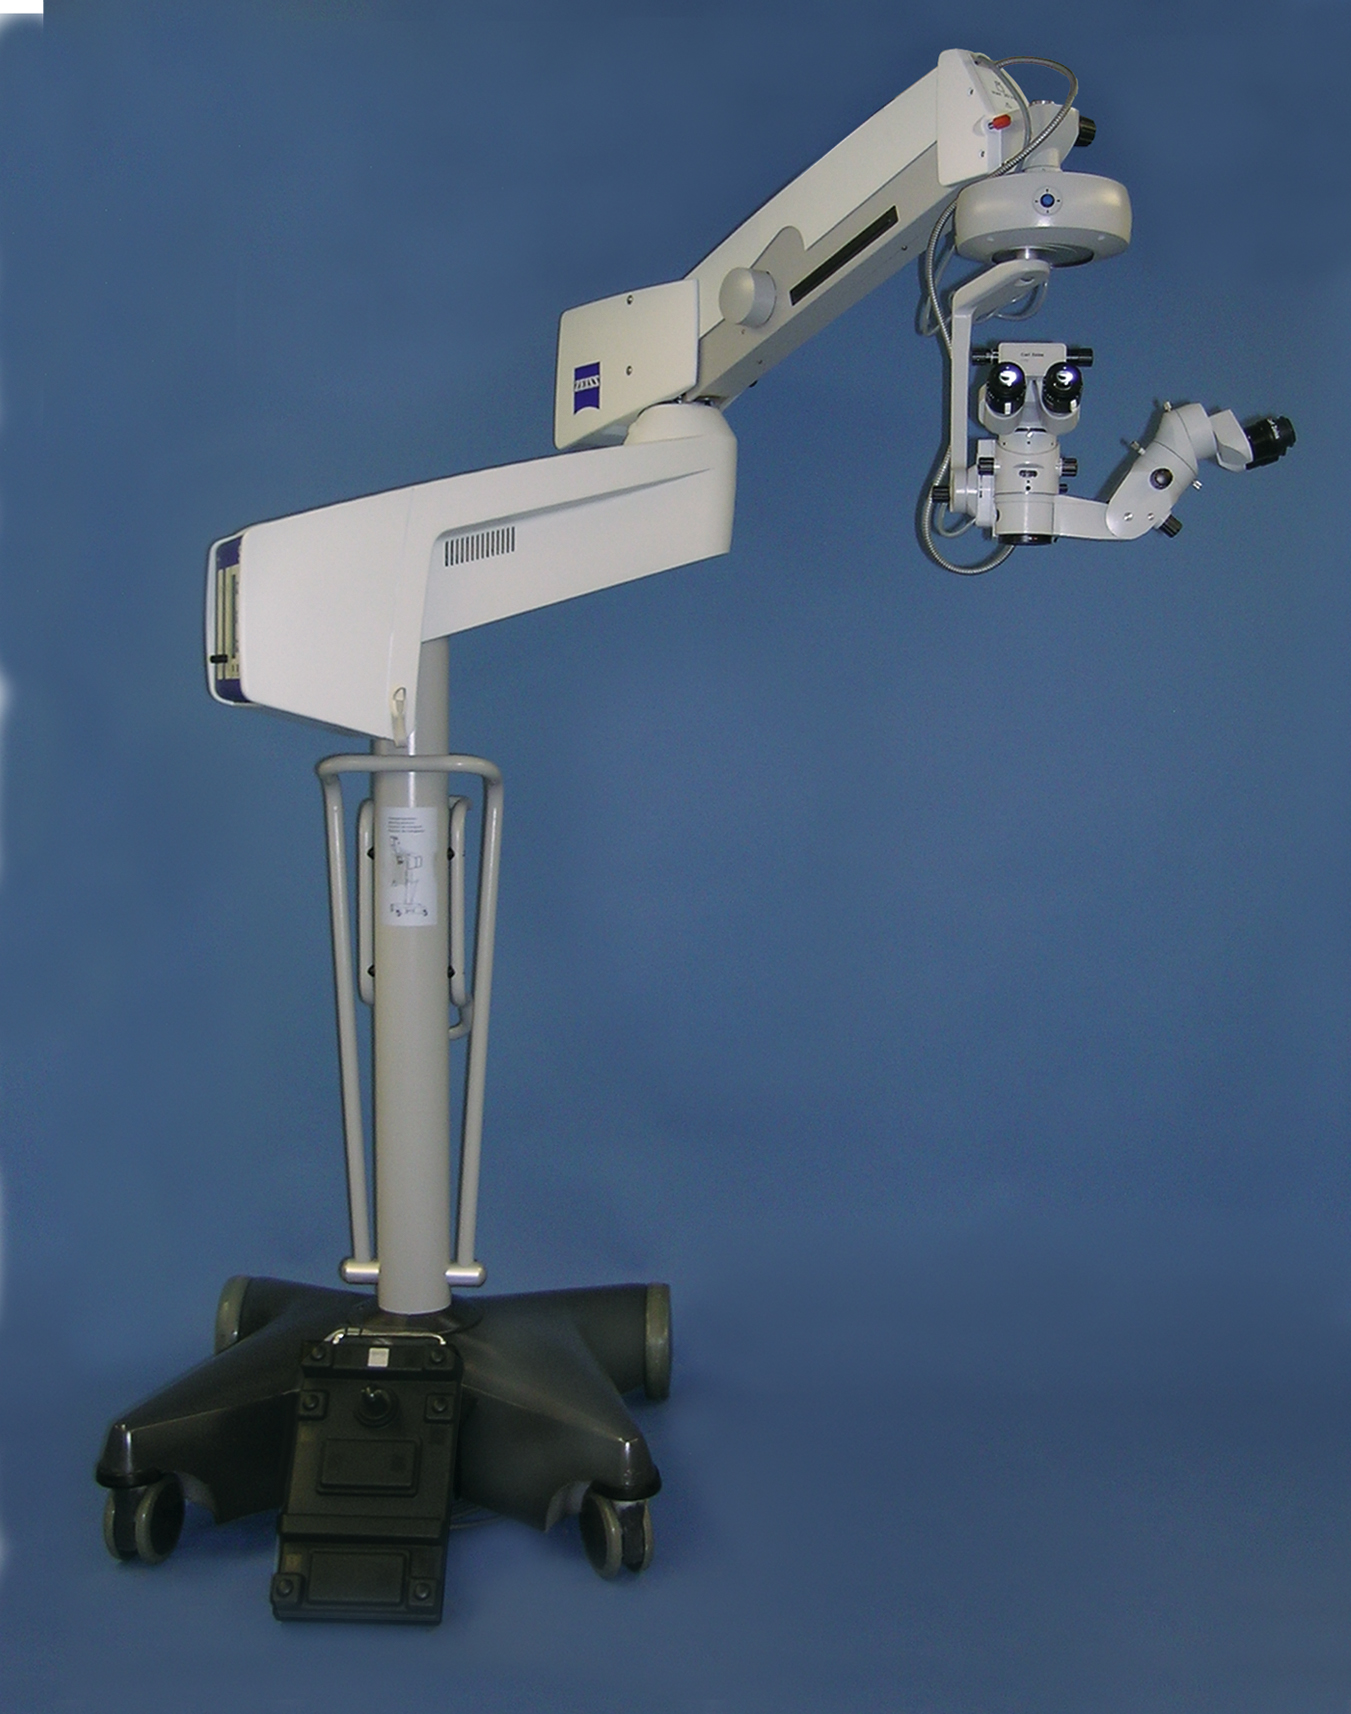 Zeiss OPMI ORL Microscope with Zeiss S5 Stand